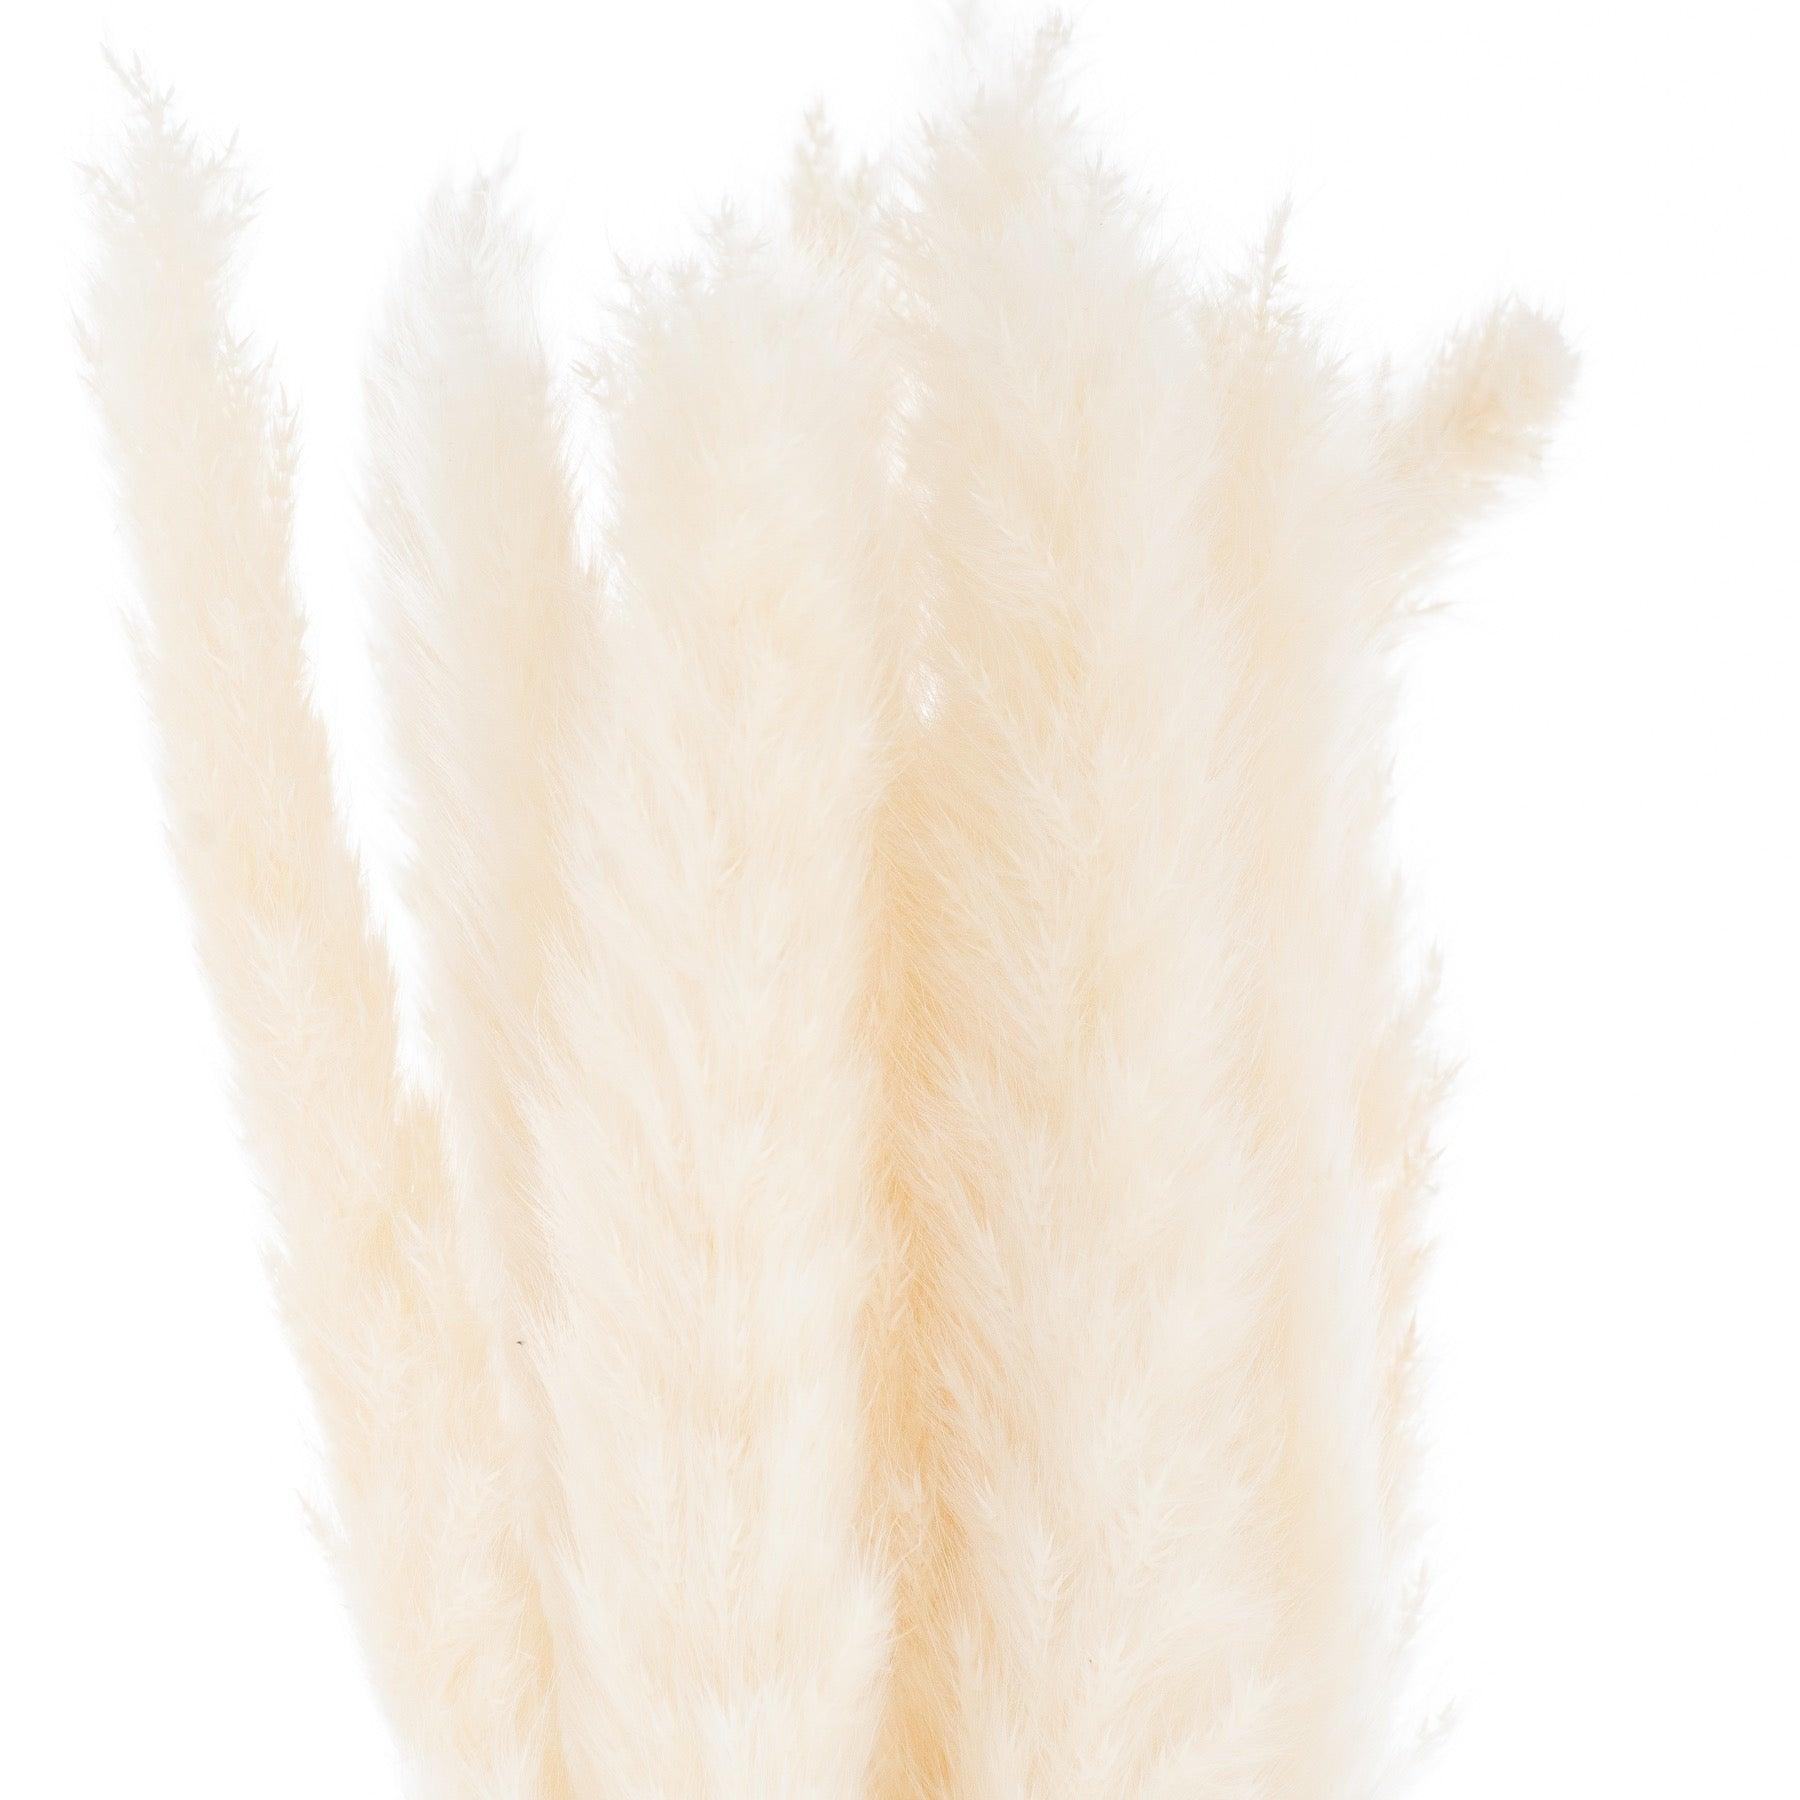 View Mini White Pampas Grass Bunch Of 15 information